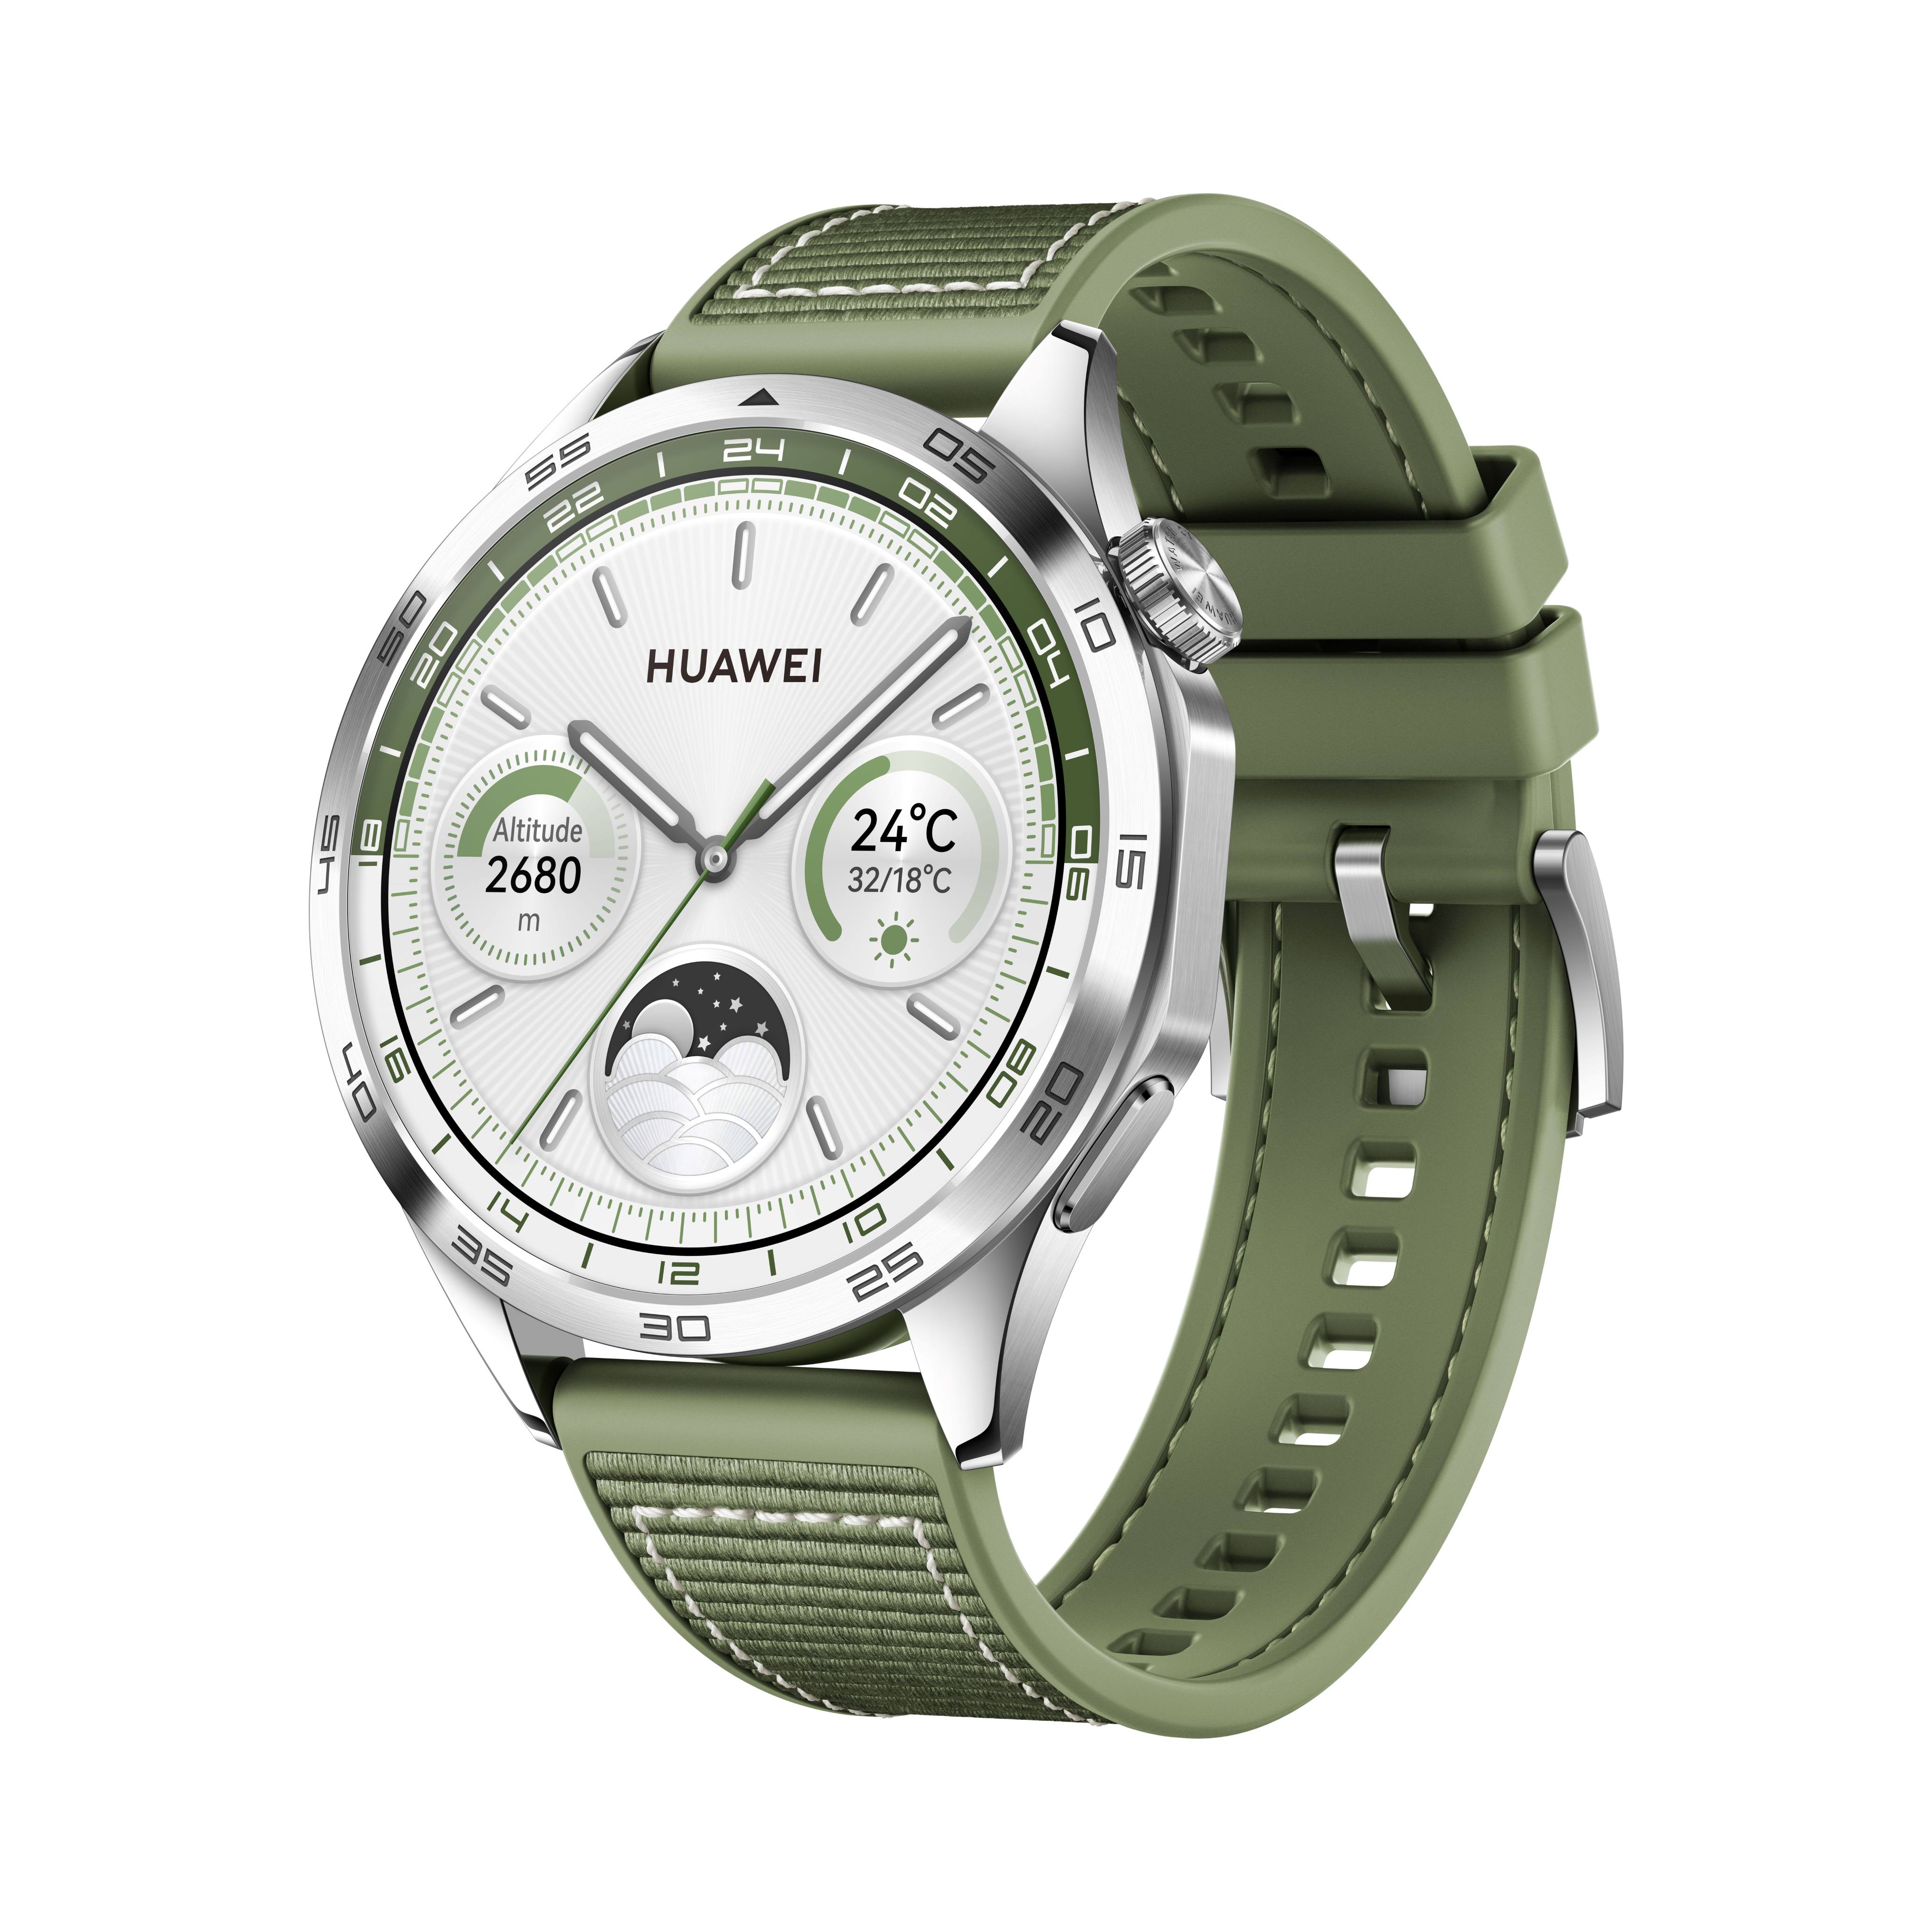 Huawei’s latest smartwatch, the GT 4 is US$100 to US$150 cheaper than Google or Apple watches and its battery life is twice as long, but it lacks popular software such as Google and Spotify. Photo: Huawei